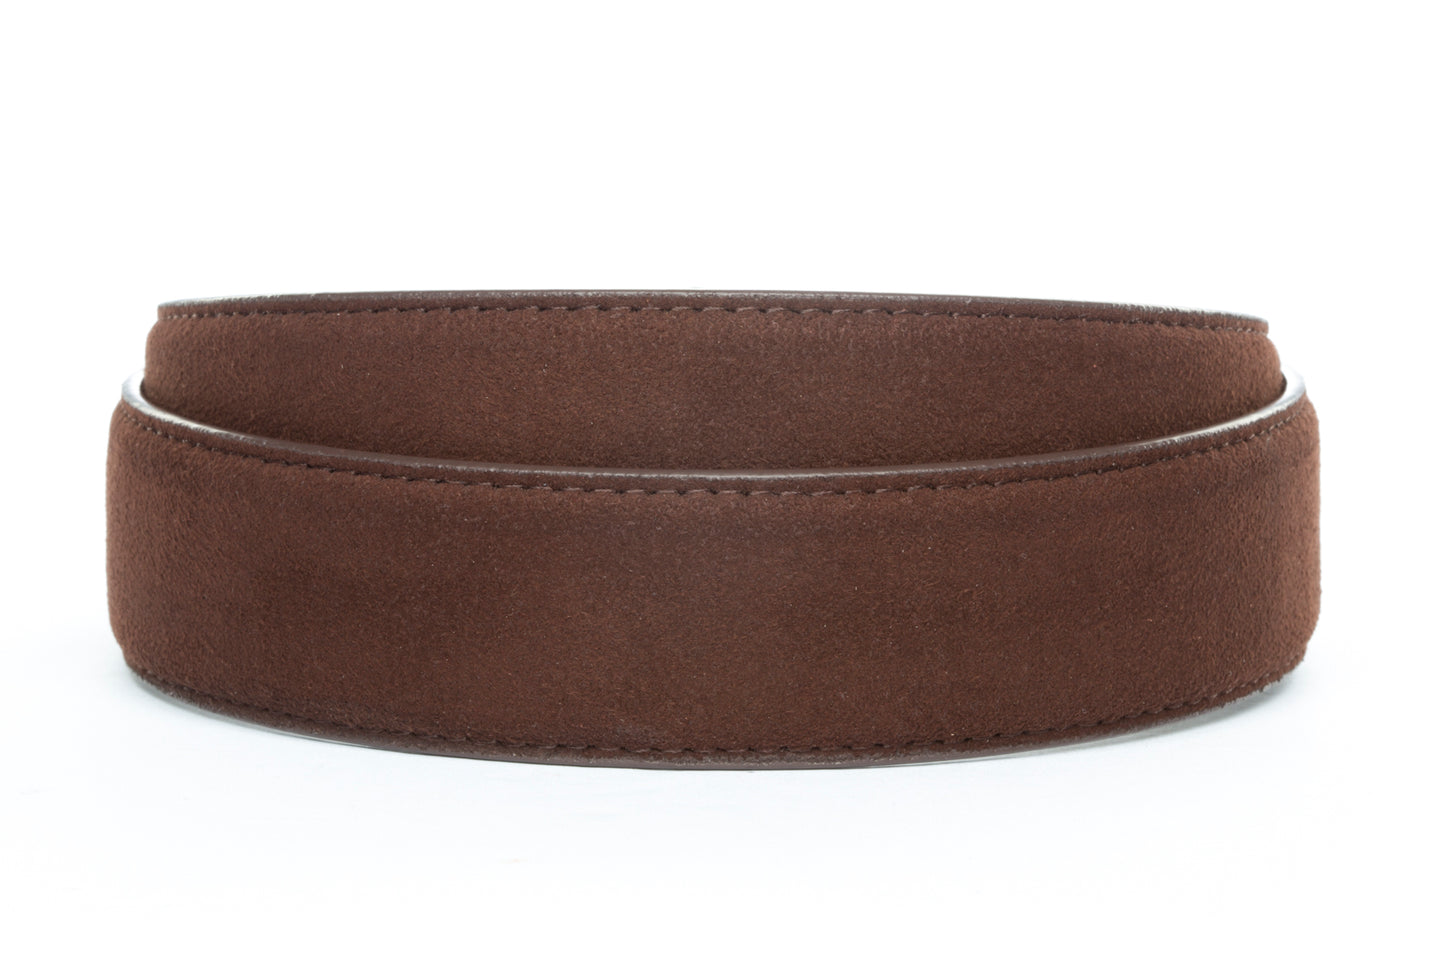 Men's micro-suede belt strap in chocolate, 1.5 inches wide, formal look